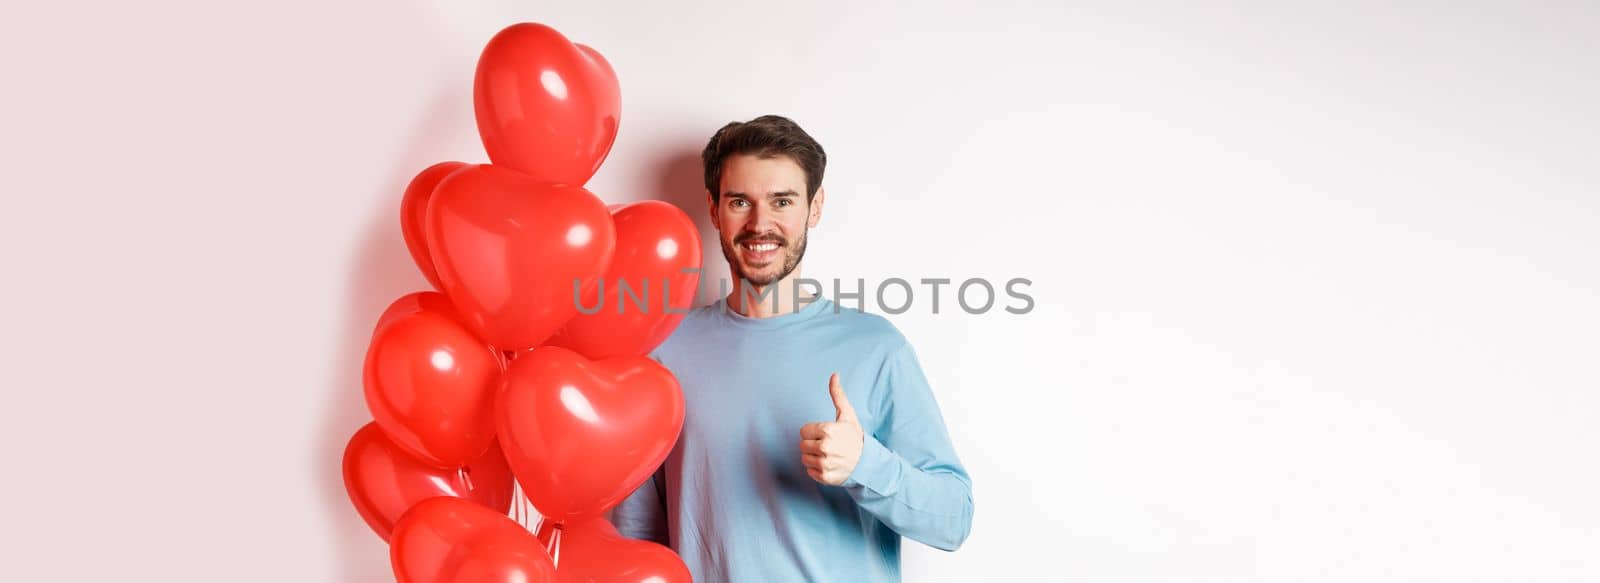 Smiling caucasian man standing with heart balloon, prepare surprise for lover on Valentines day, showing thumbs up and looking at camera, white background.